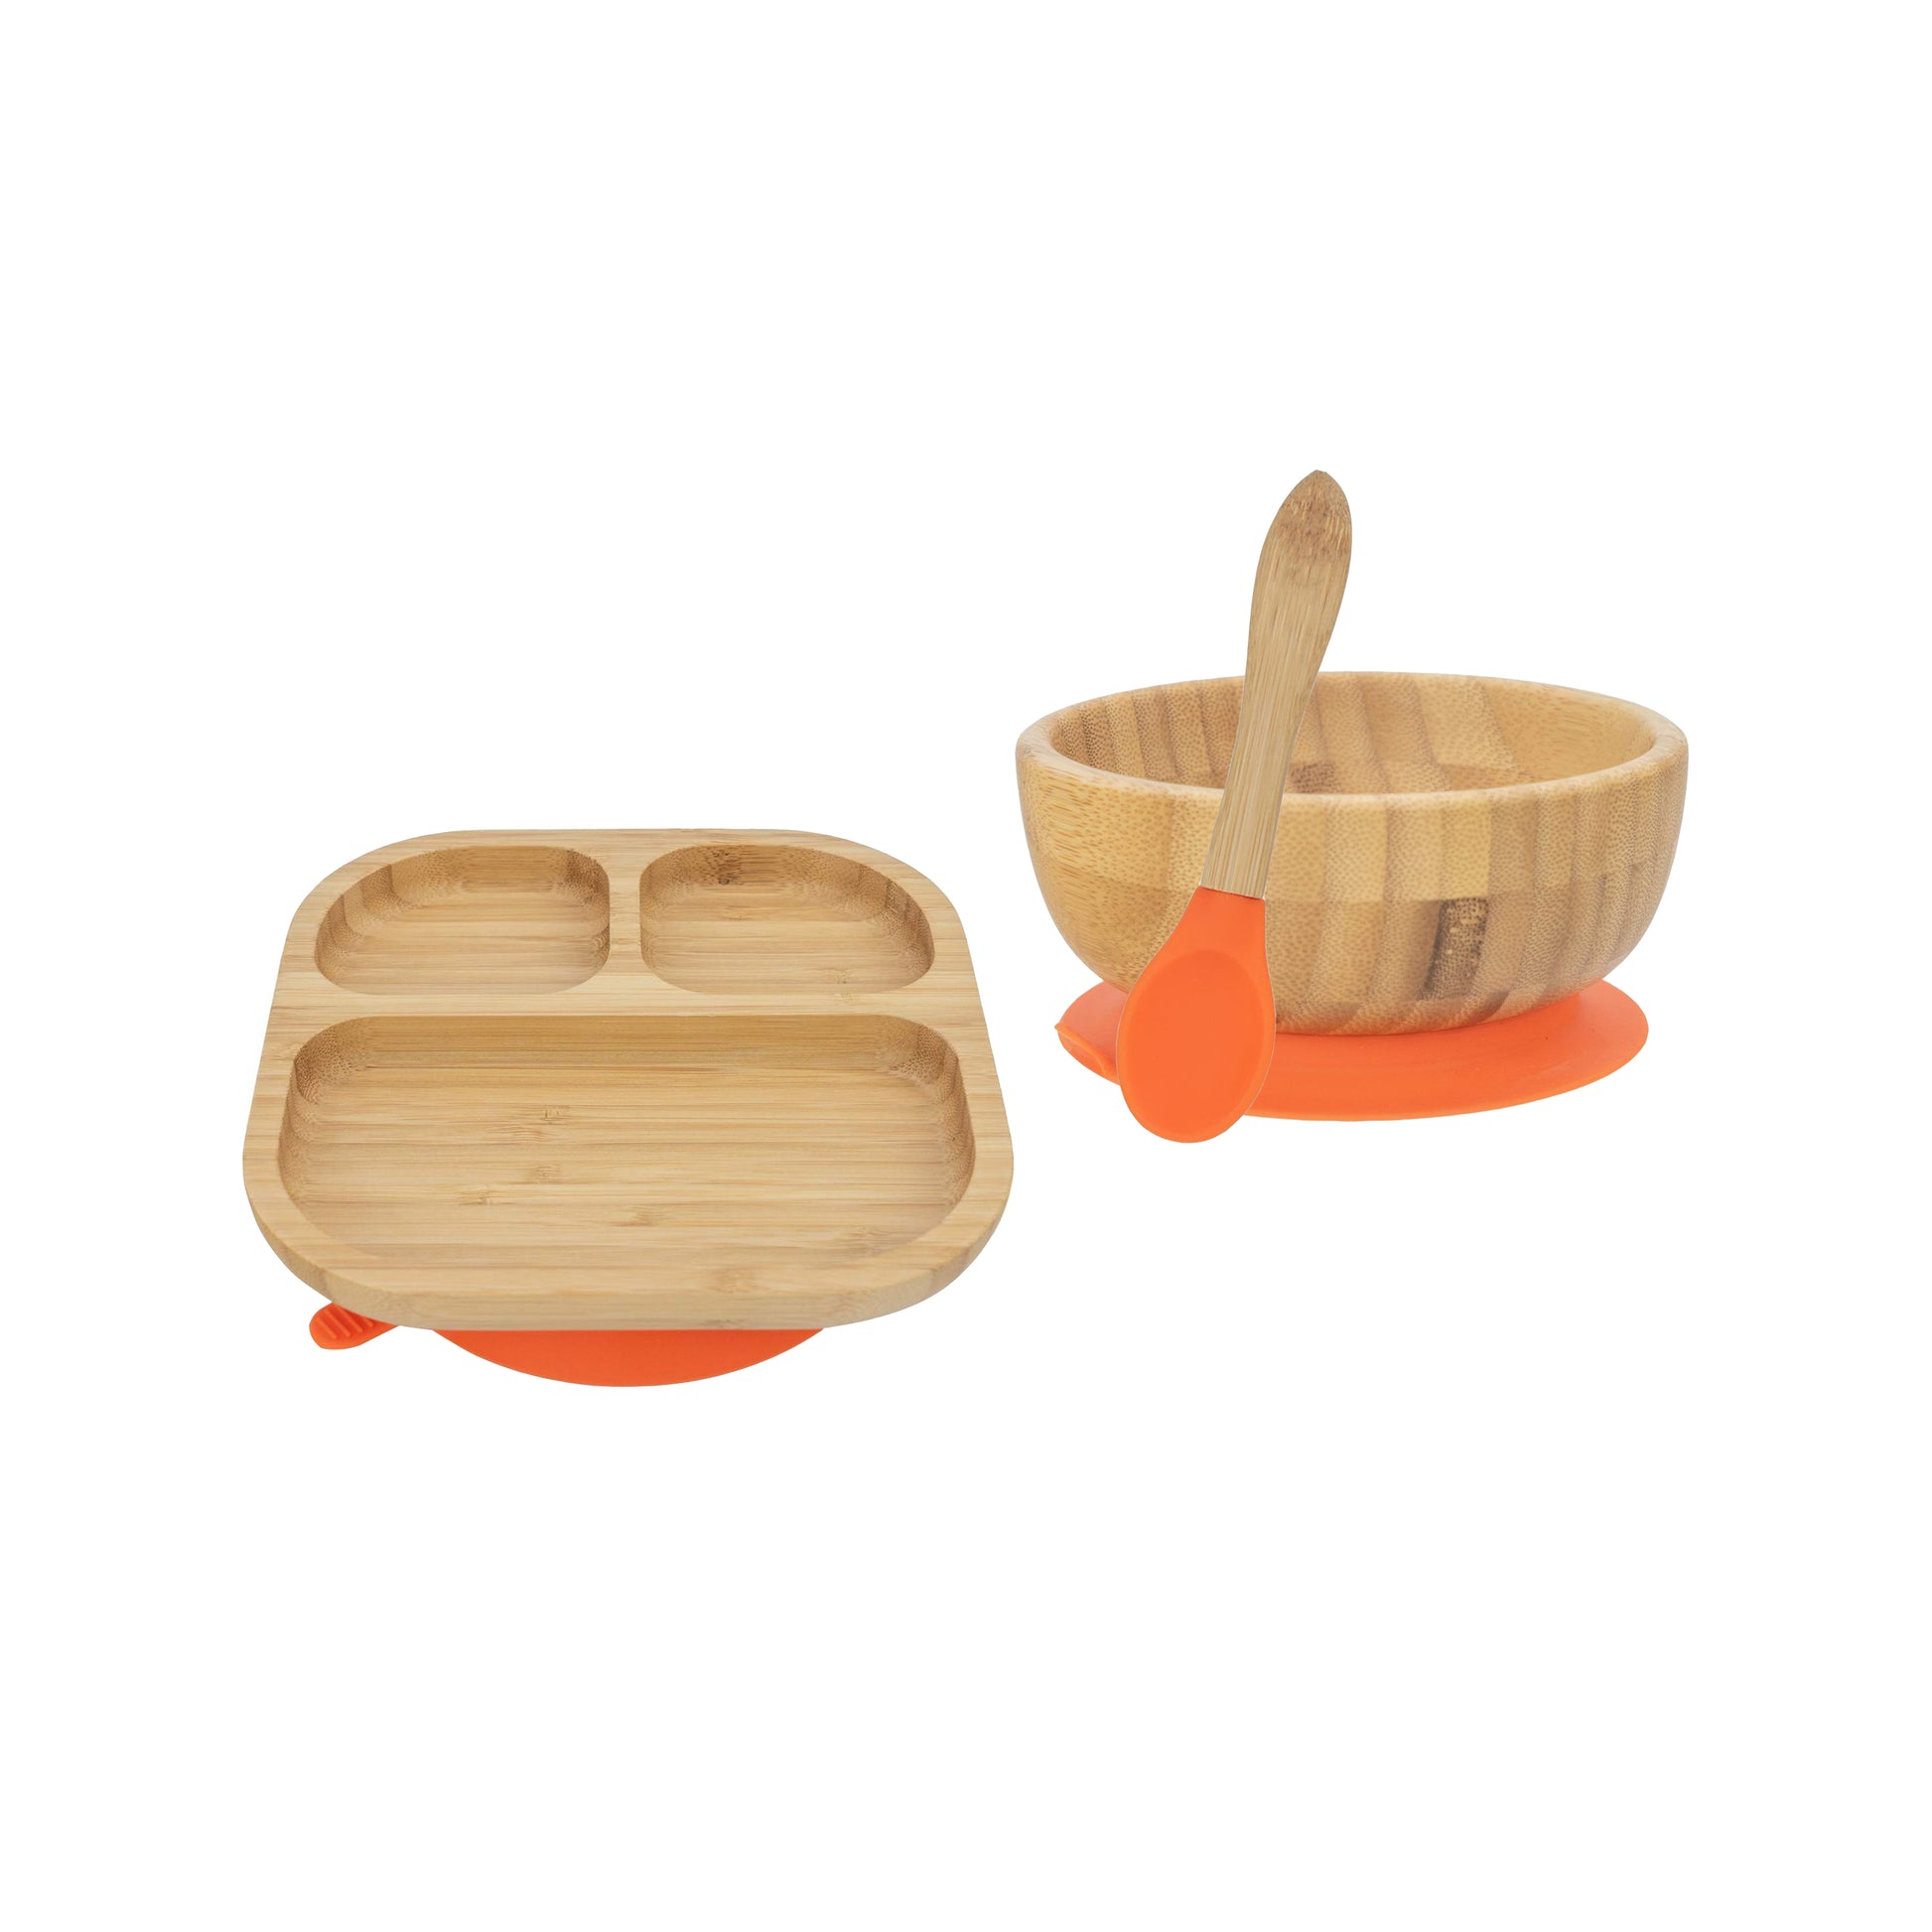 Personalised Wooden Tiny Dining Bamboo Plate, Bowl, and Spoon Set- Orange | Babba box.